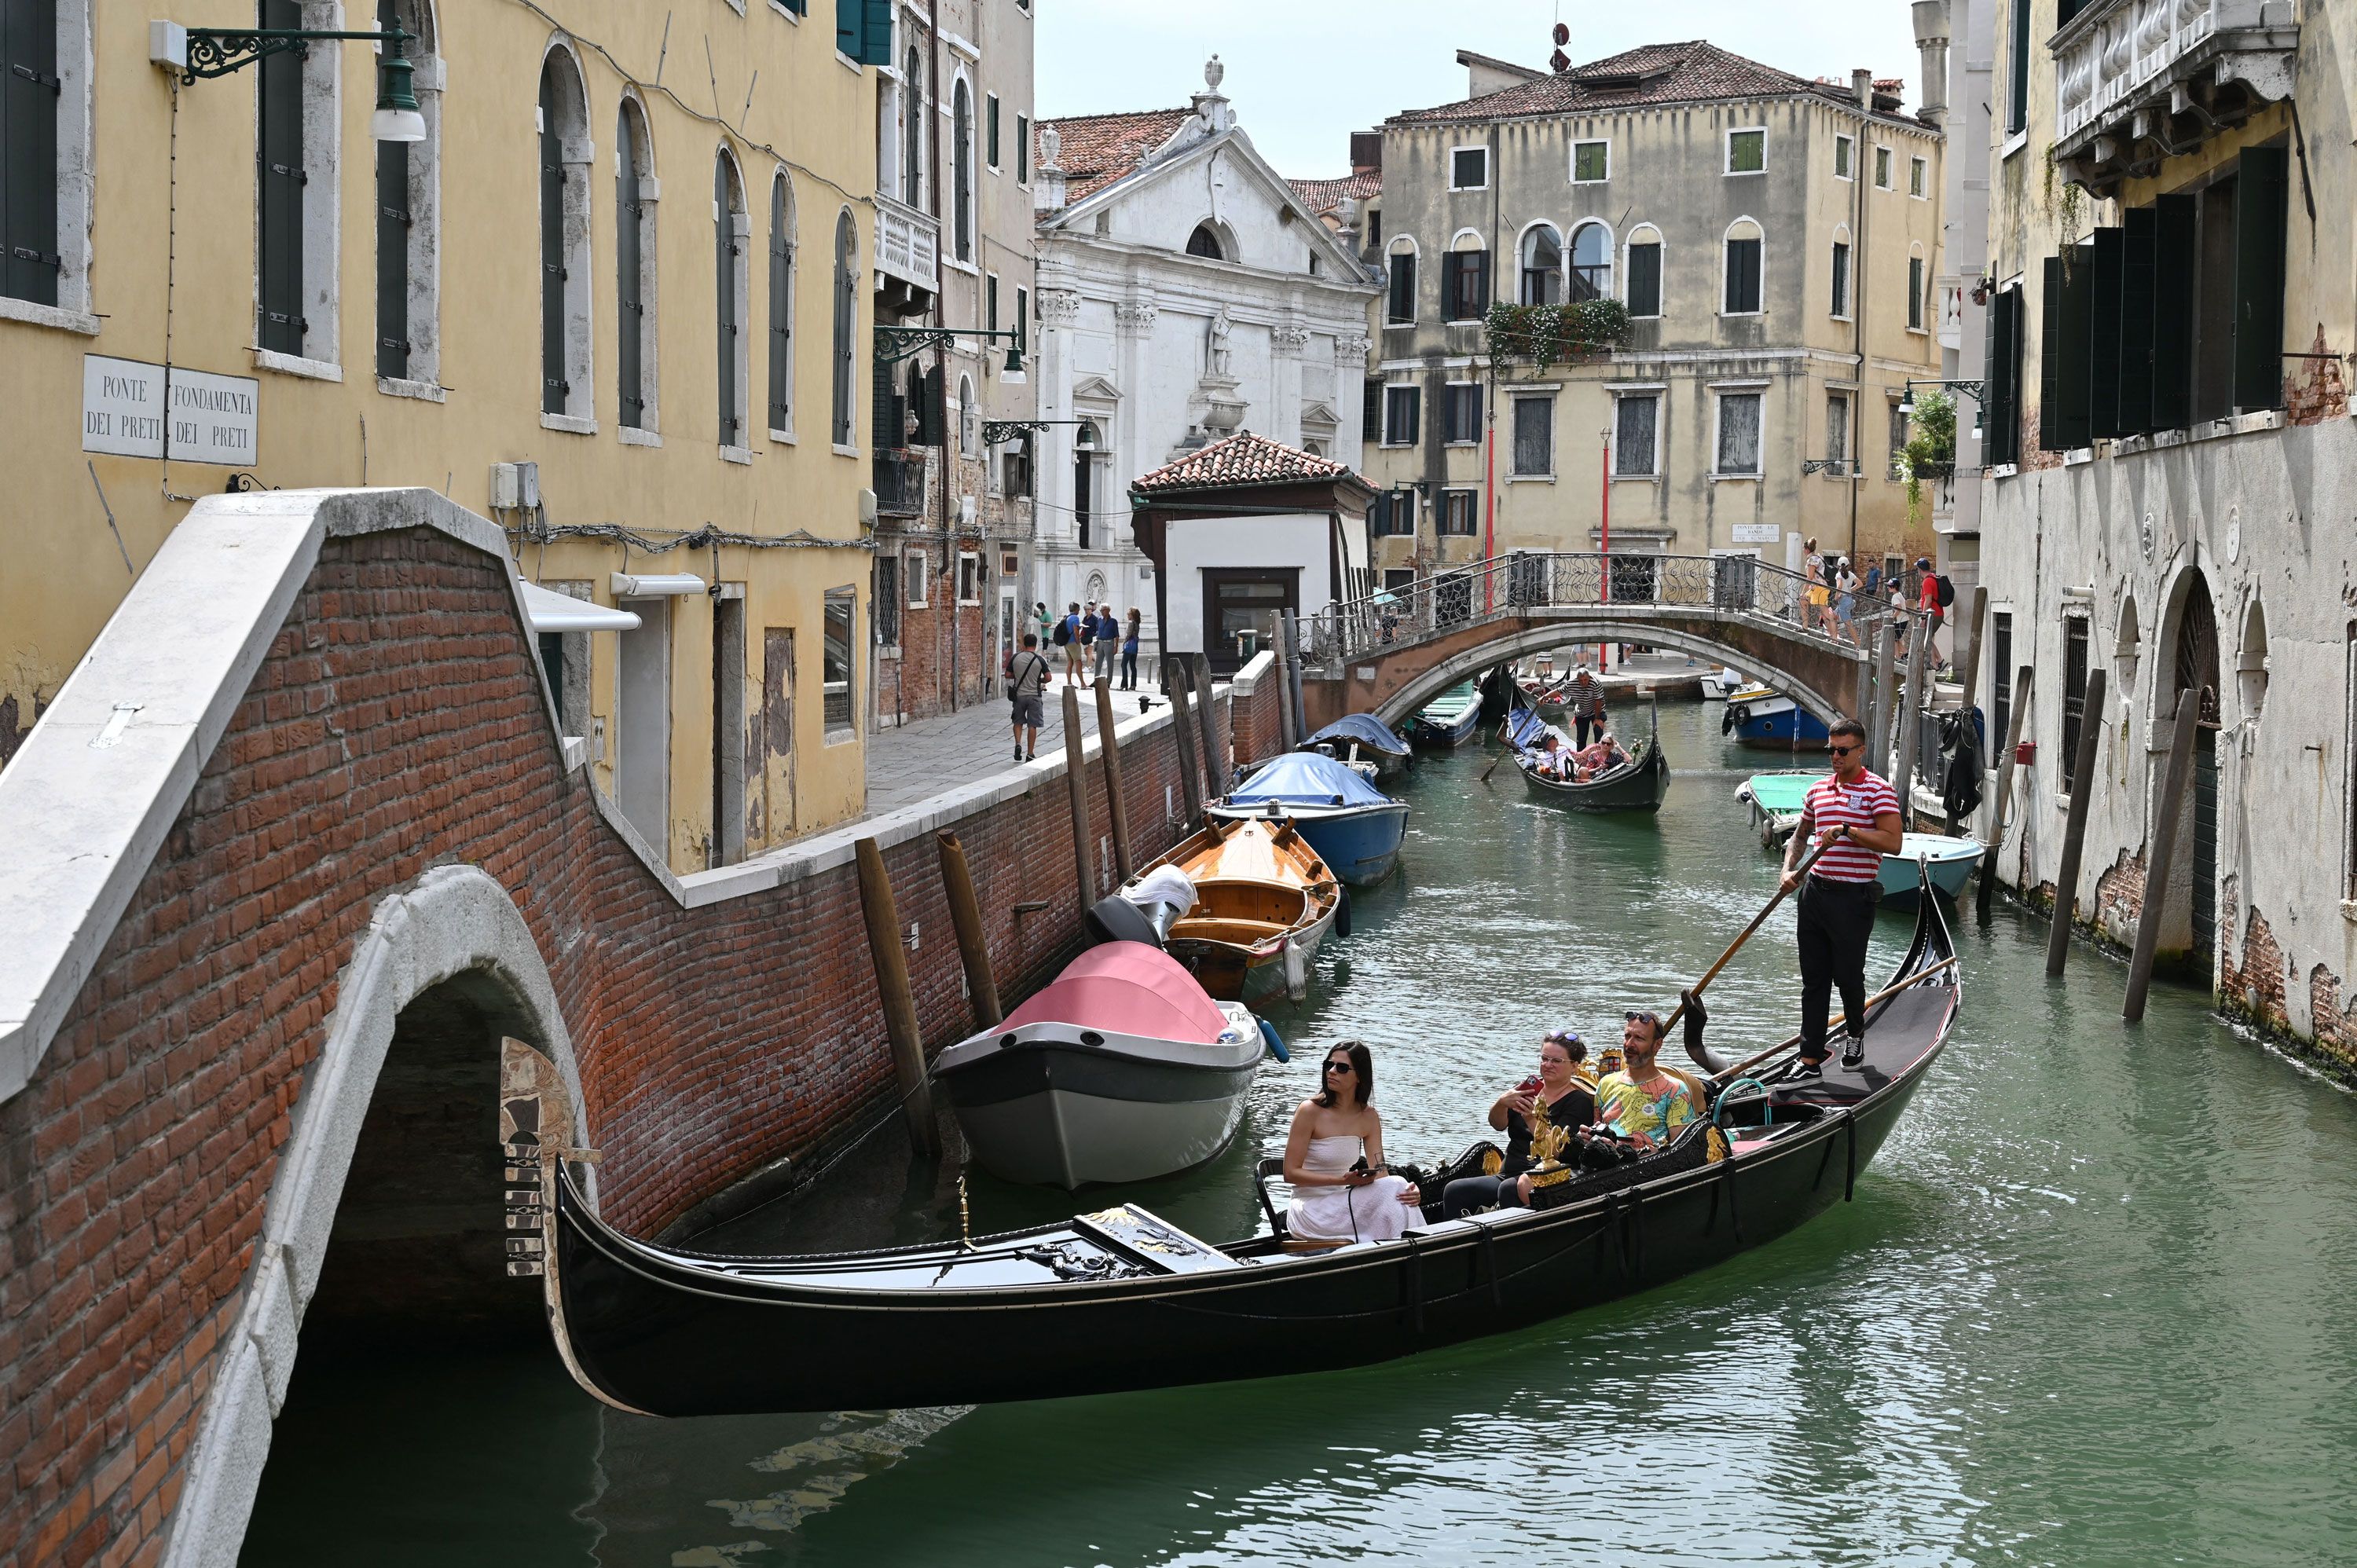 Exploiting an untapped gem: Could the city of Venice benefit from